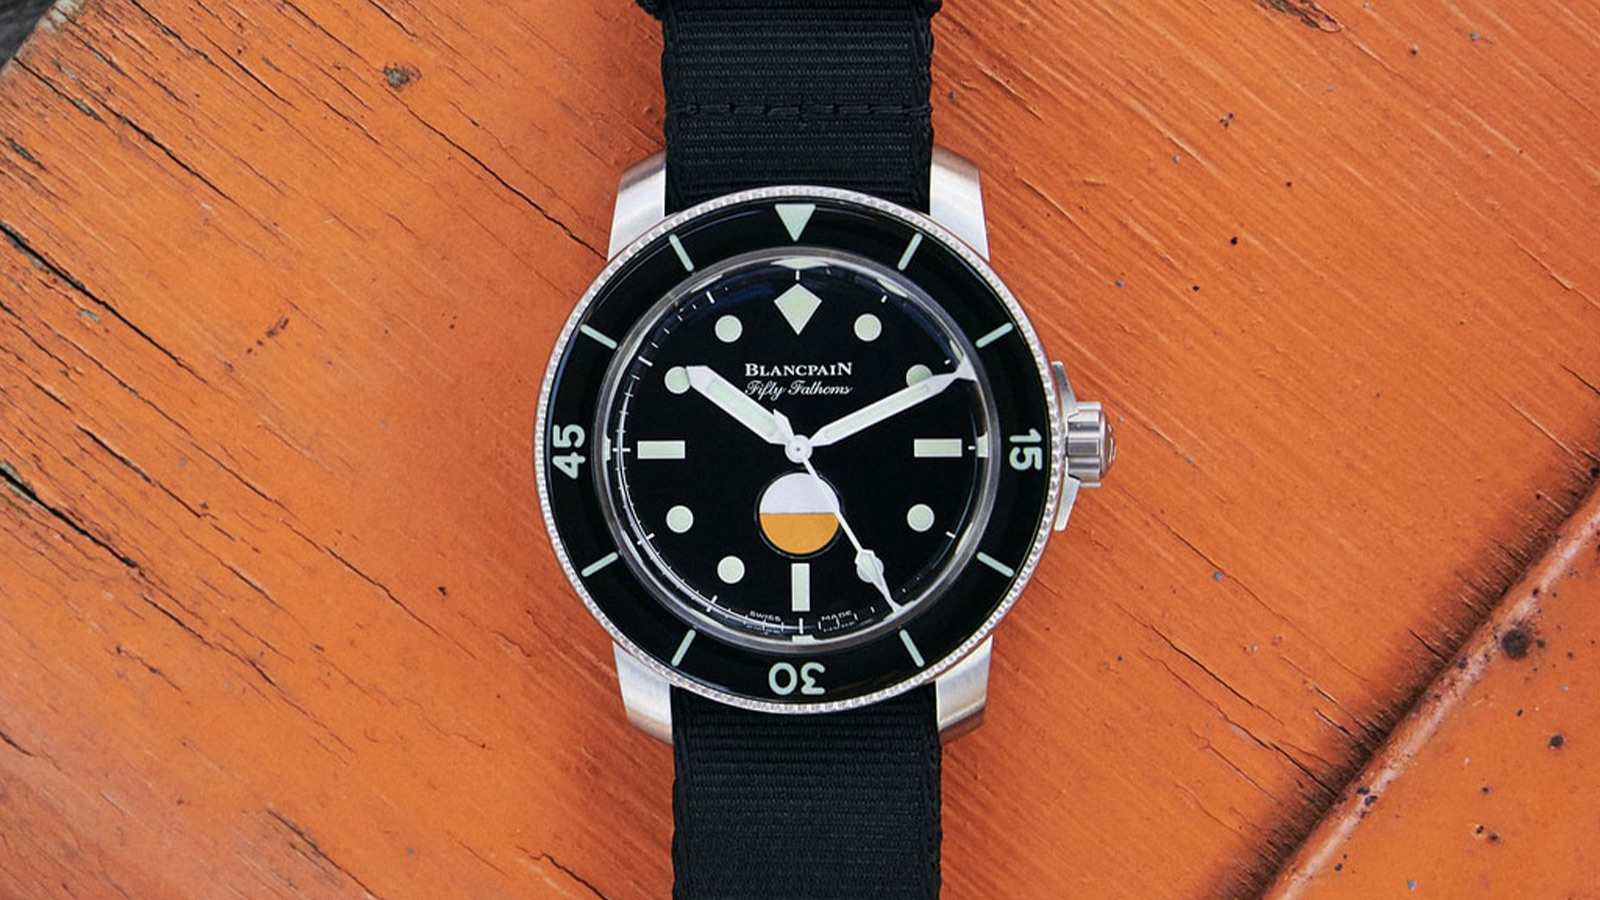 Blancpain Fifty Fathoms MIL-SPEC Hodinkee Limited Edition 